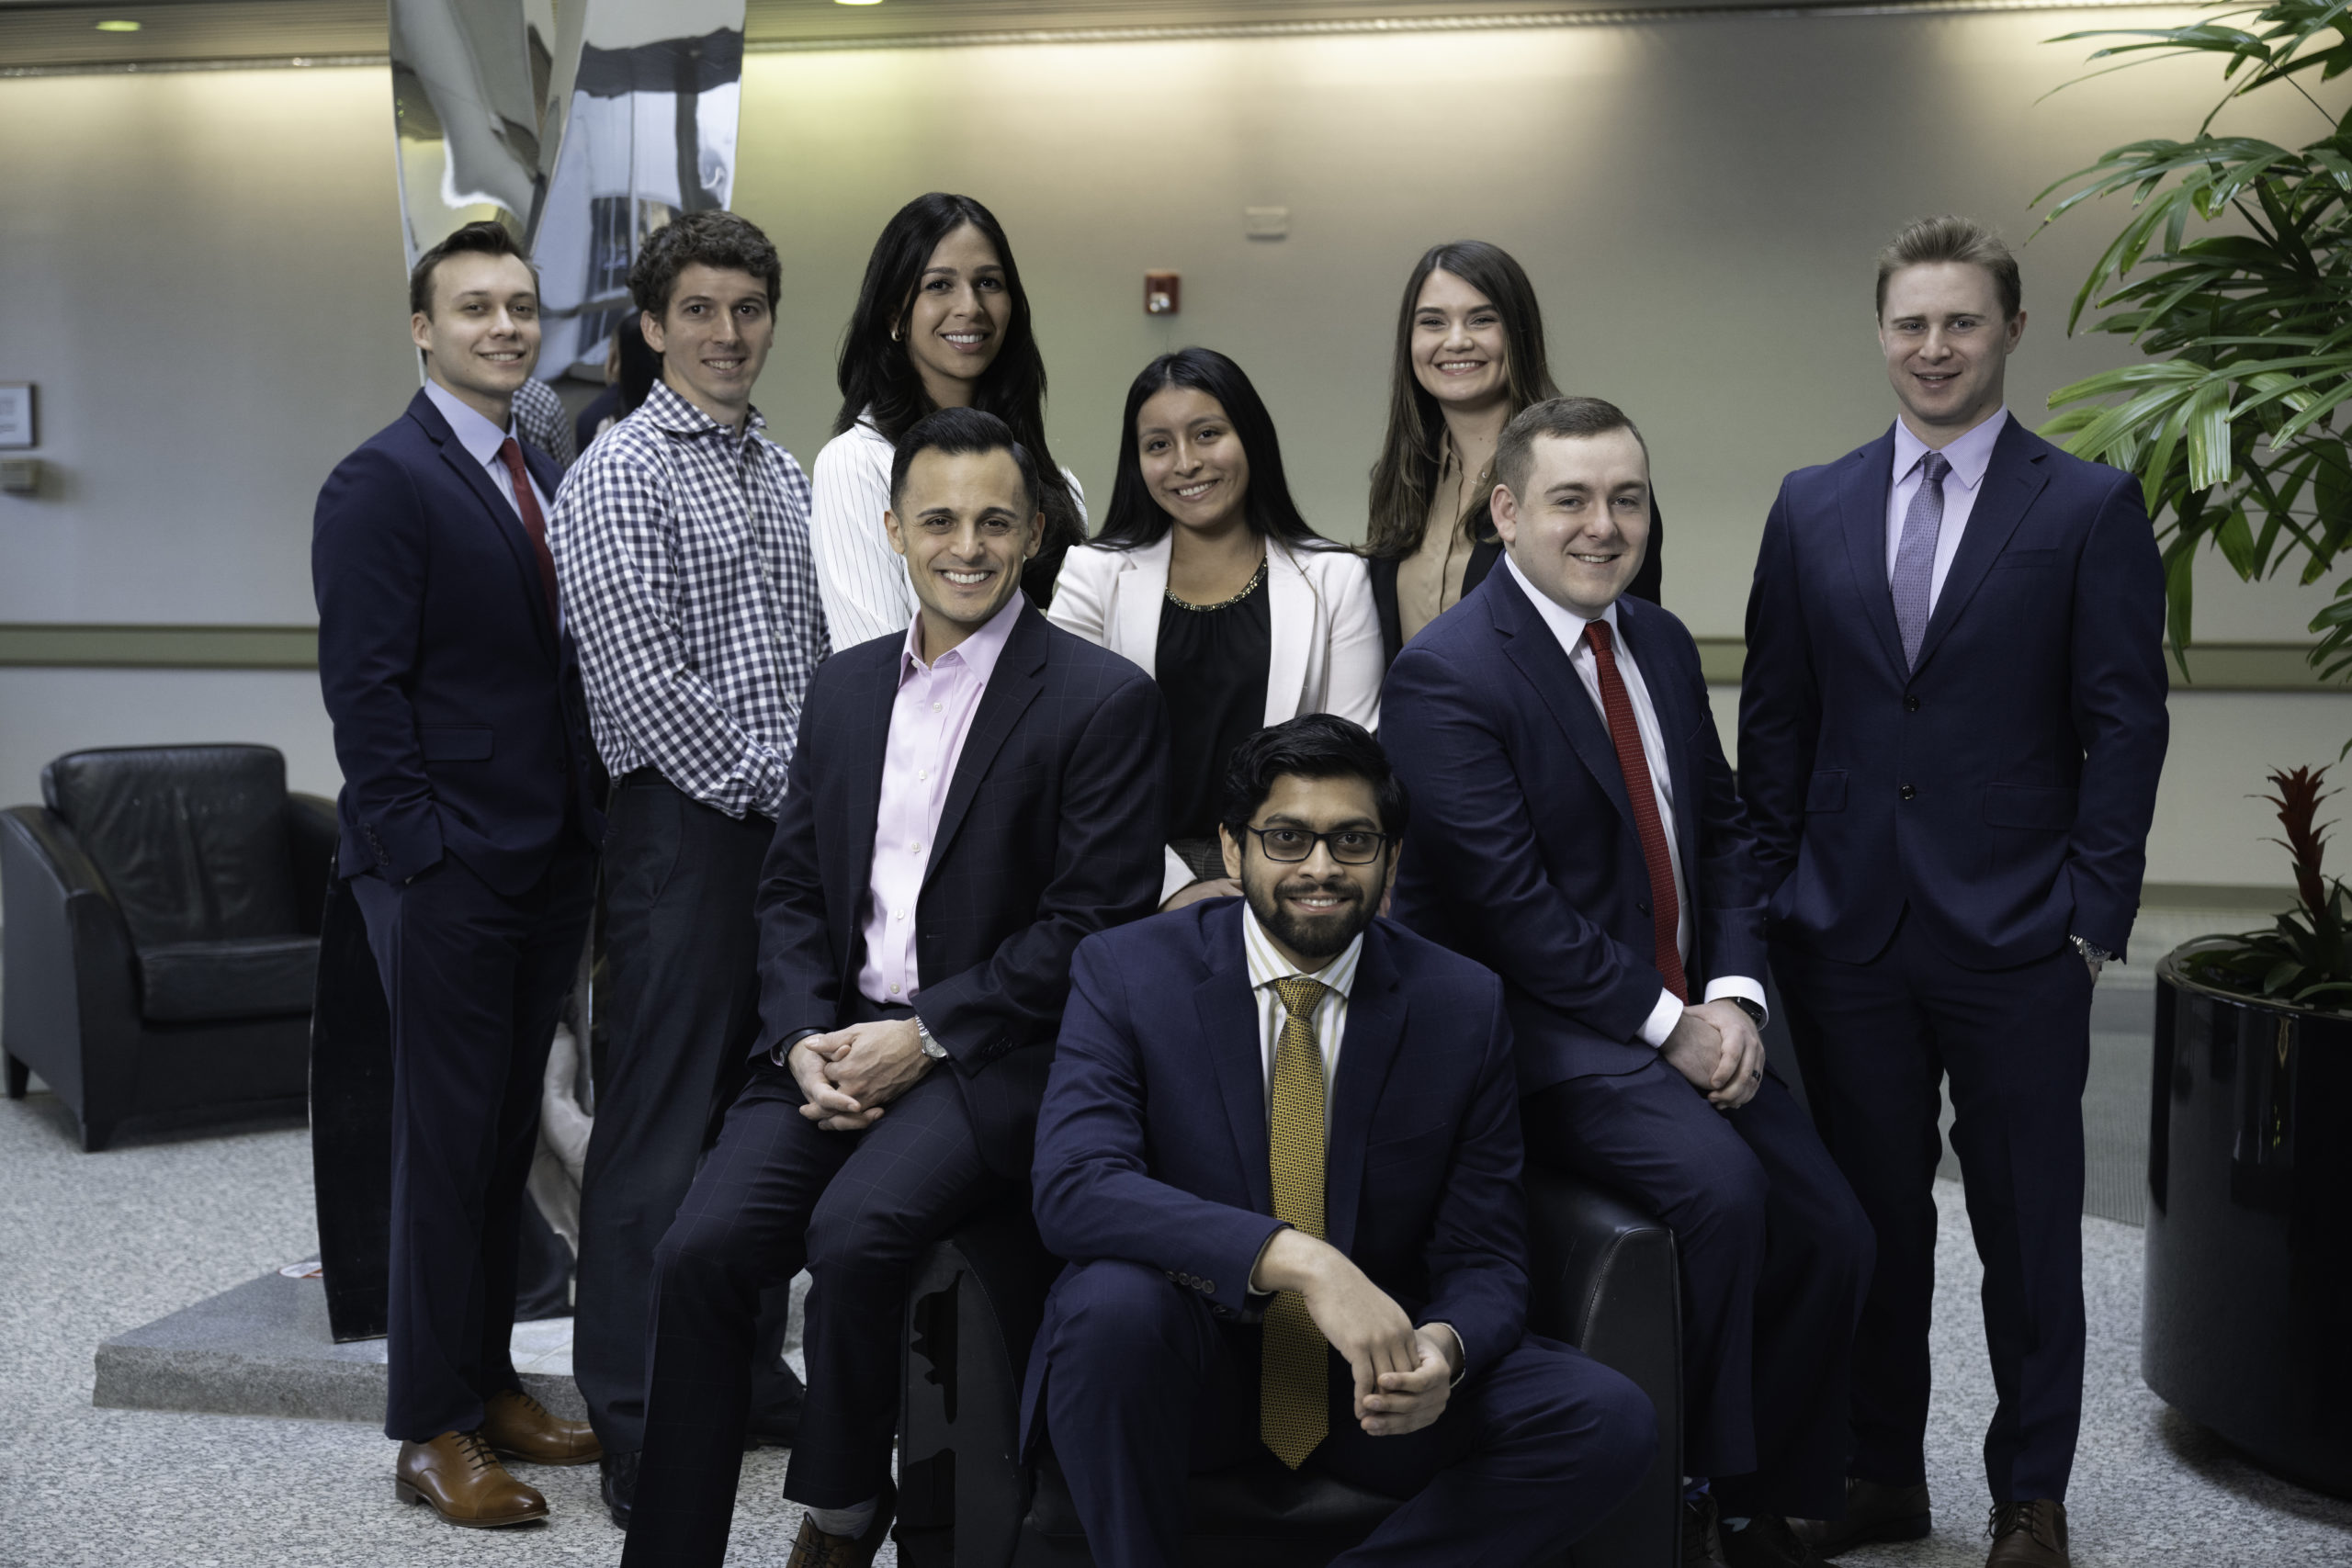 RRBB Accountants and Advisors on Hiring Spree to Further Company Growth Strategy Image